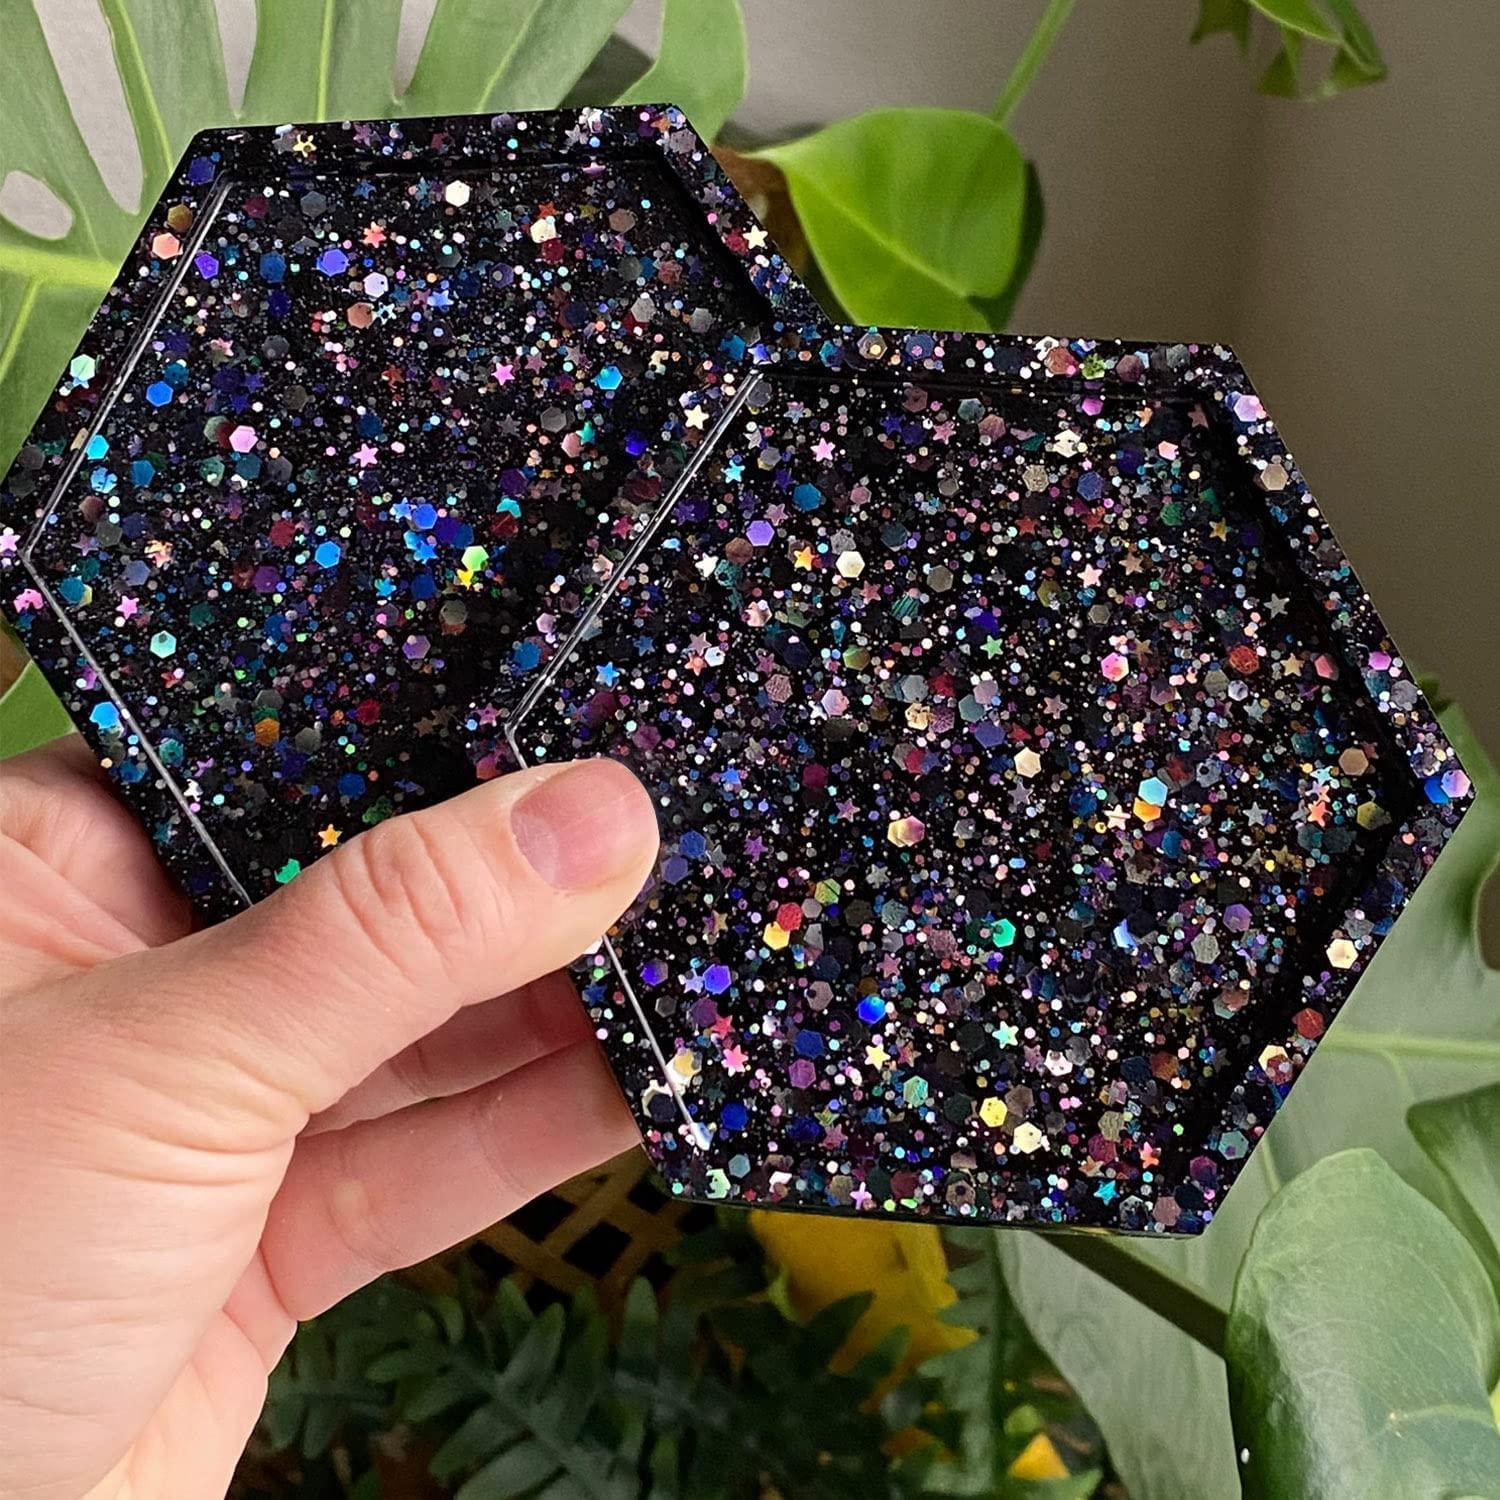 50g Sheer Black Resin Sequins Glitter For Epoxy Resin Filler Pigment Powder  Mix Hexagons Loose Flakes UV Silicone Mold Handcraft - AliExpress